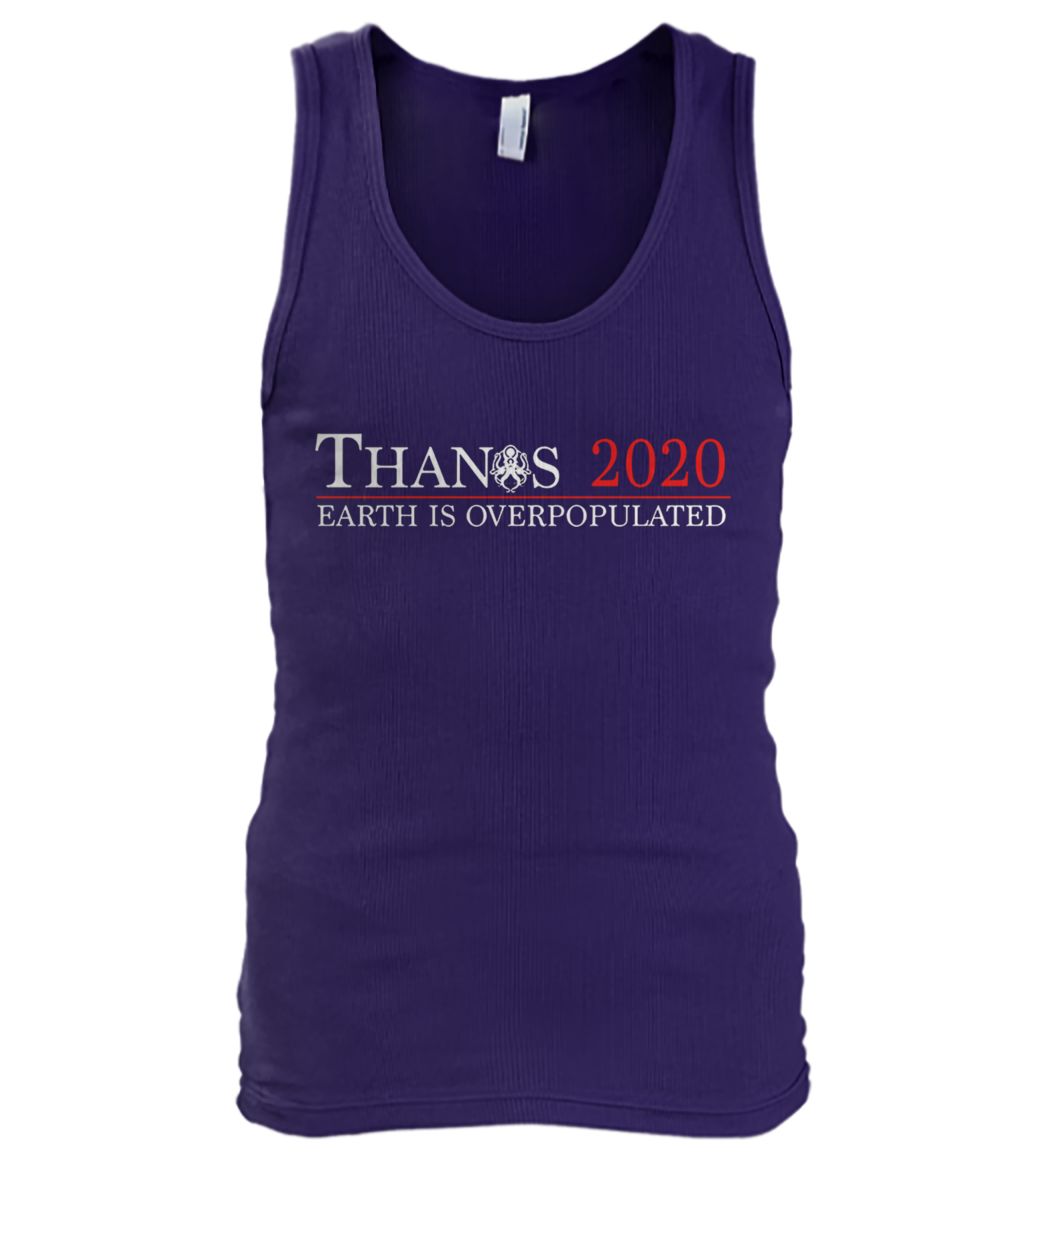 Avengers end game thanos 2020 earth is overpopulated men's tank top